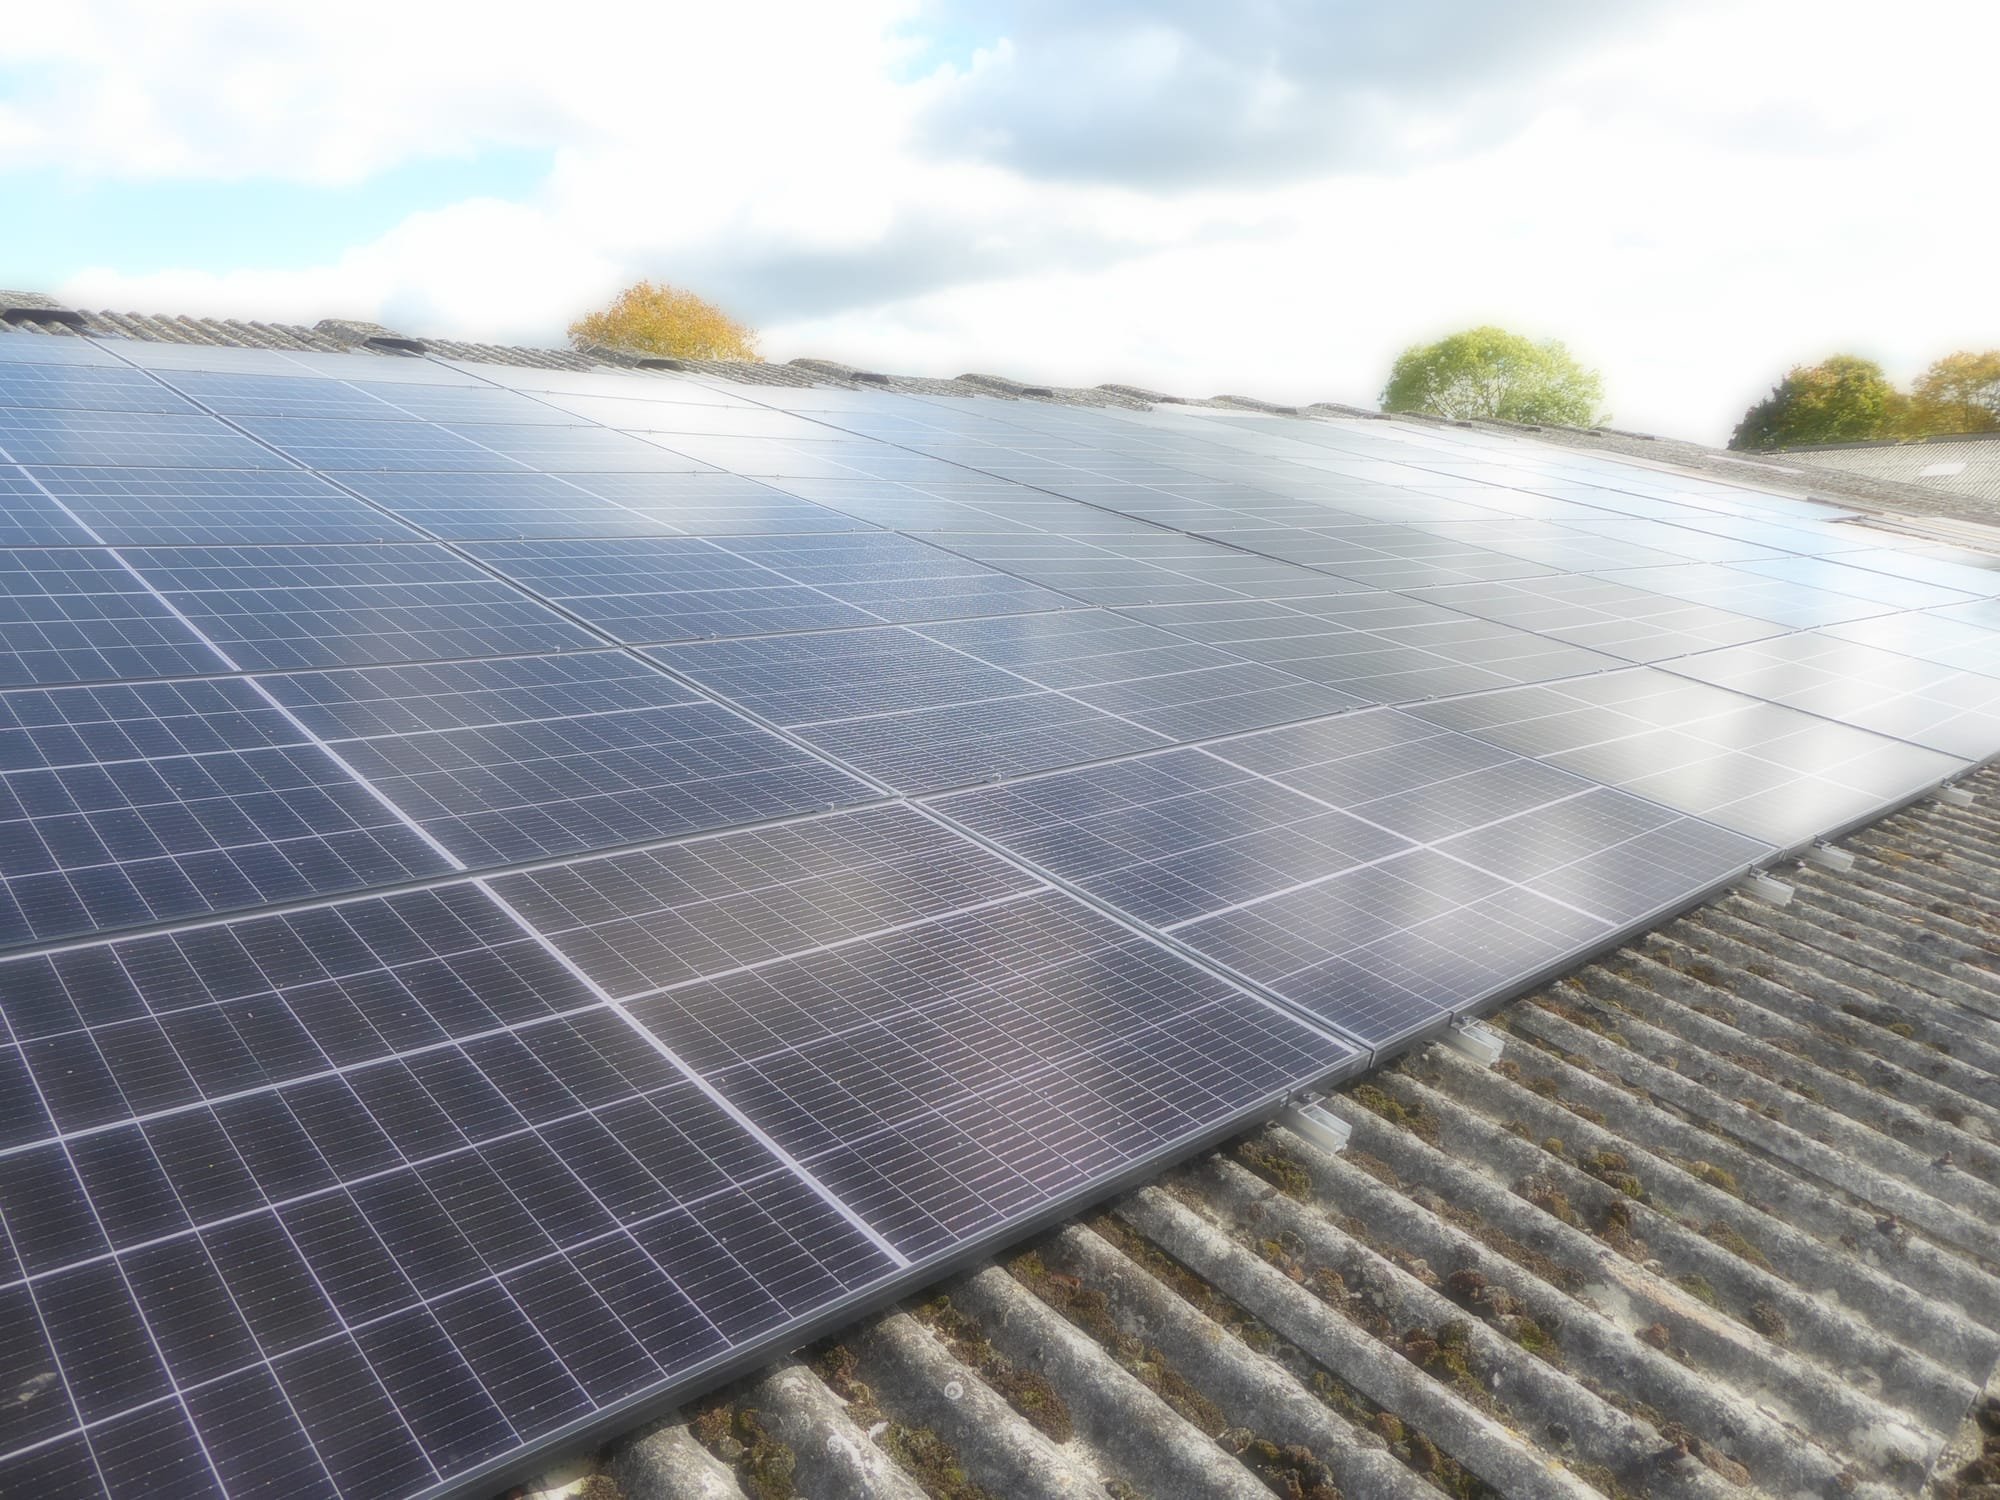 Solar Partner has been appointed to install 28 kW of PV modules on a farm